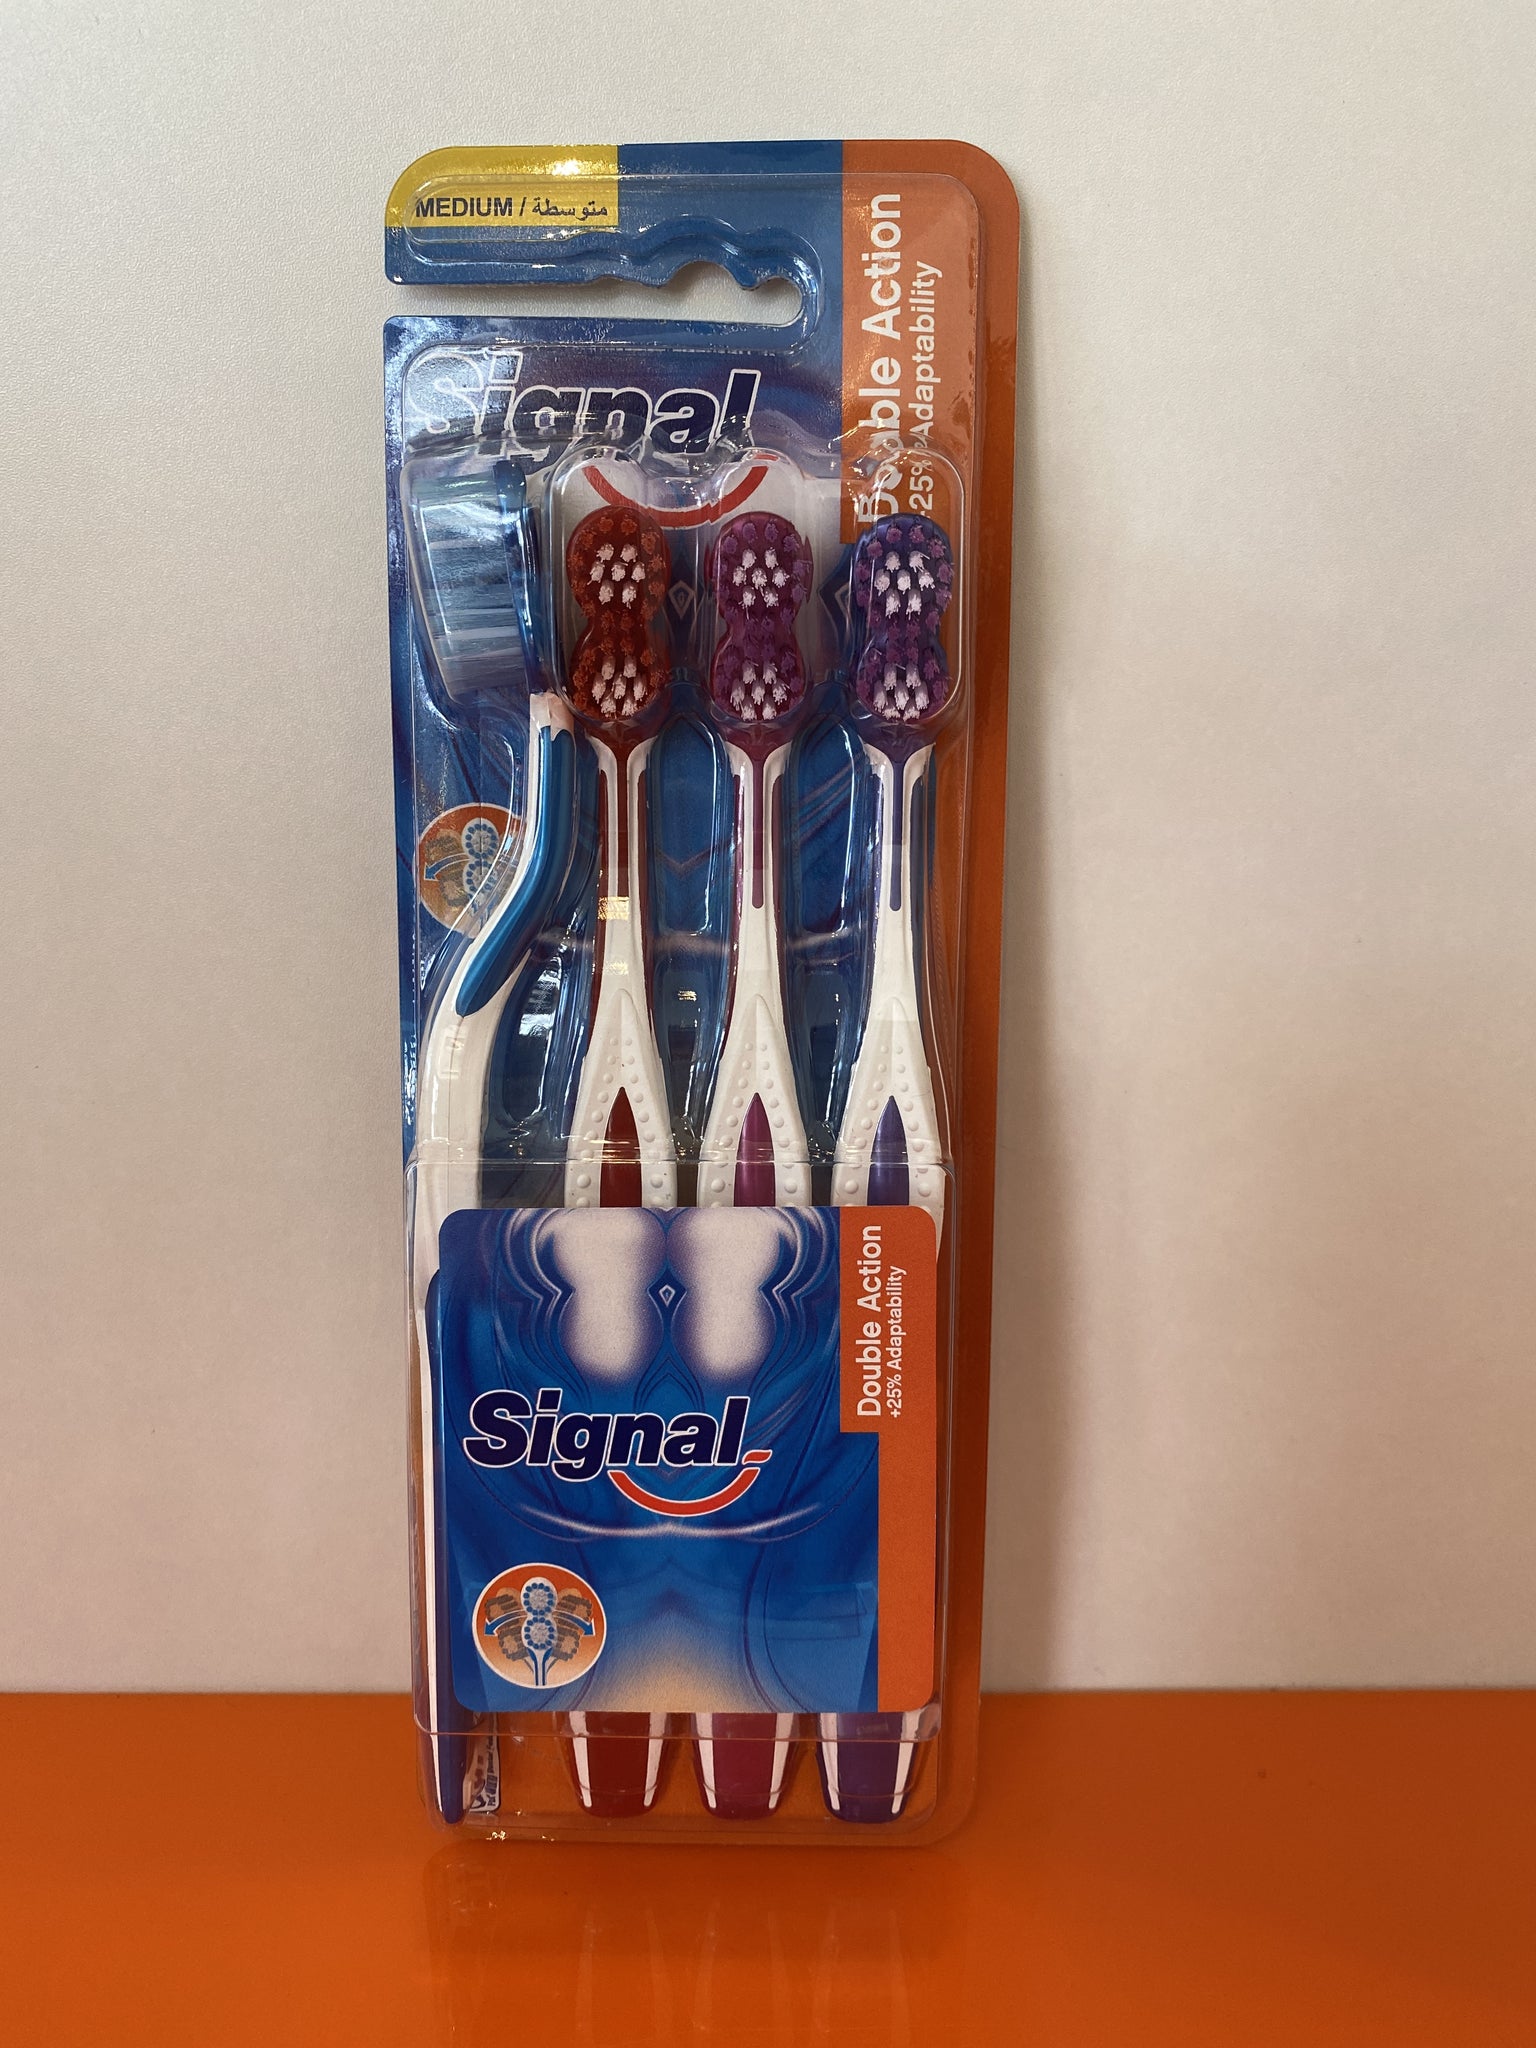 SIGNAL TOOTHBRUSH 4PACK DOUBLE ACTION MEDIUM